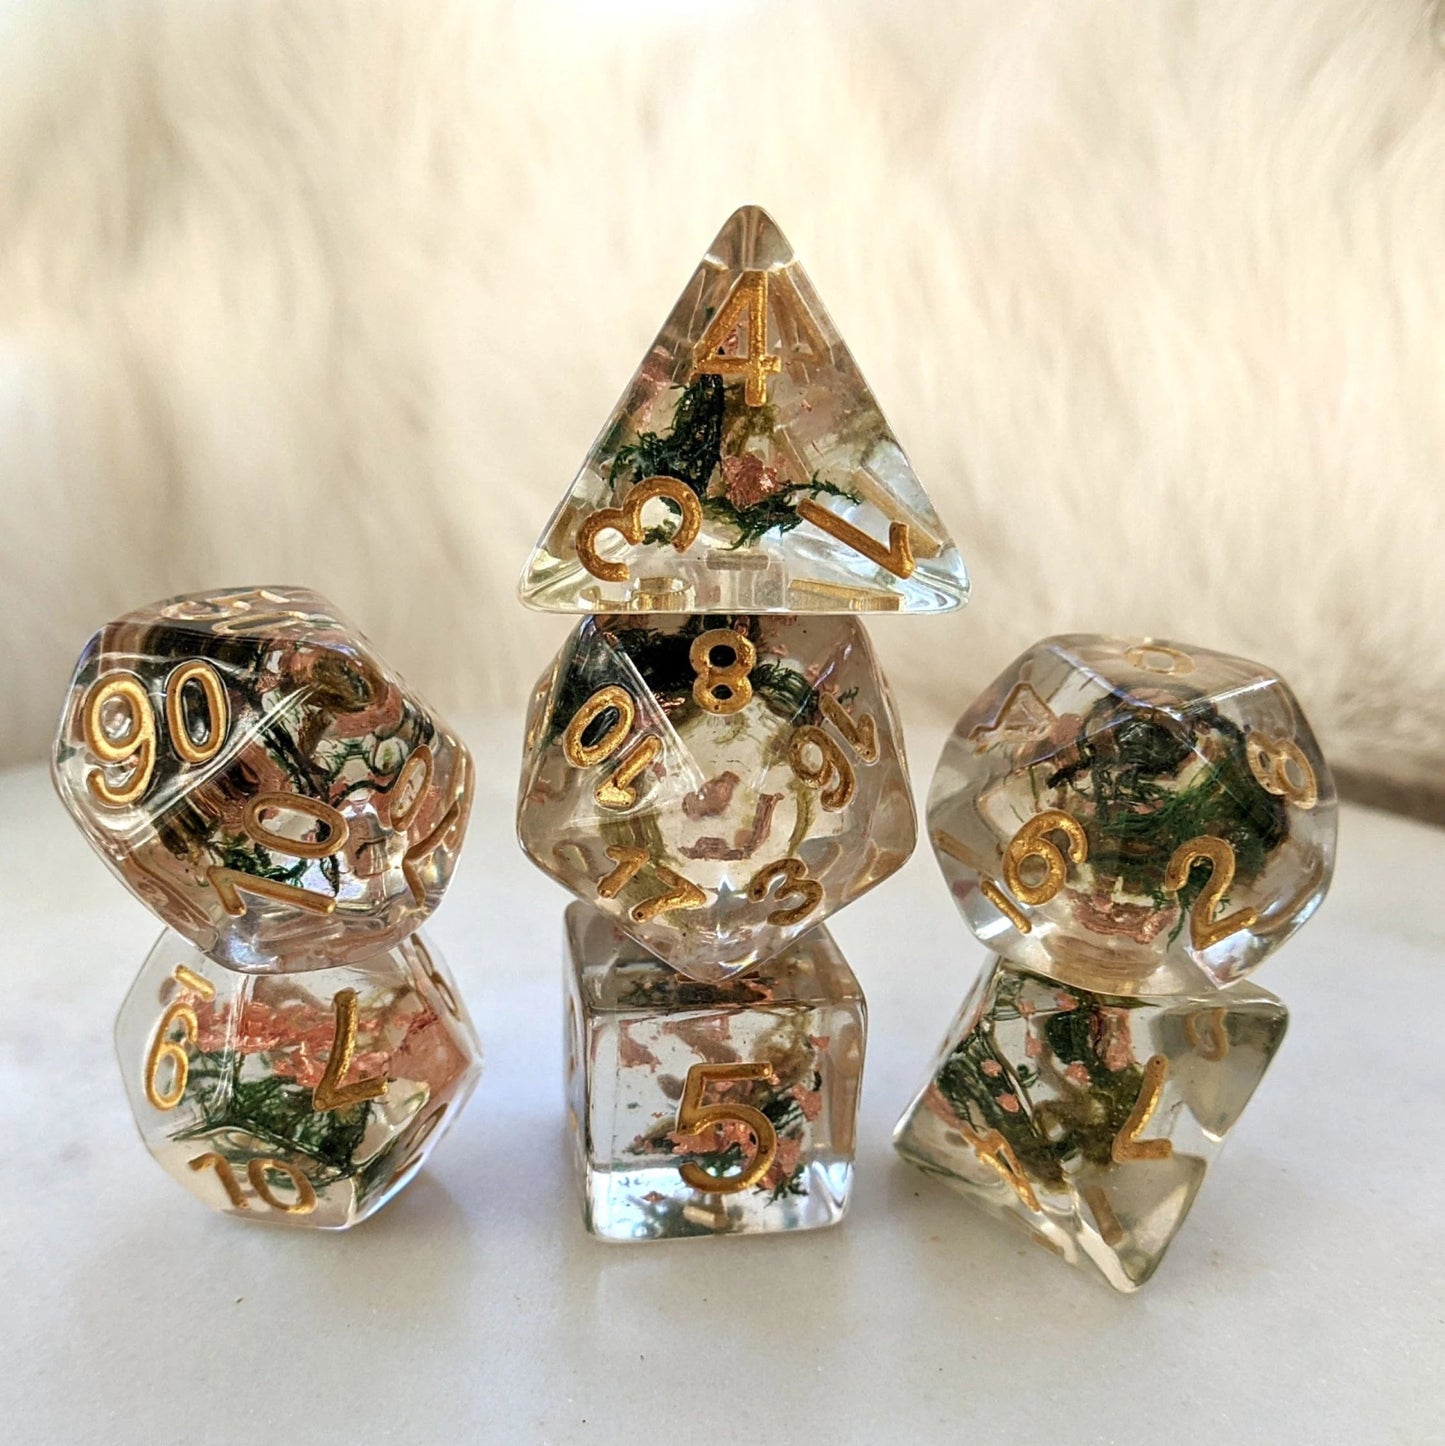 Moss and Copper - 7 Piece Dice Set - The Fourth Place